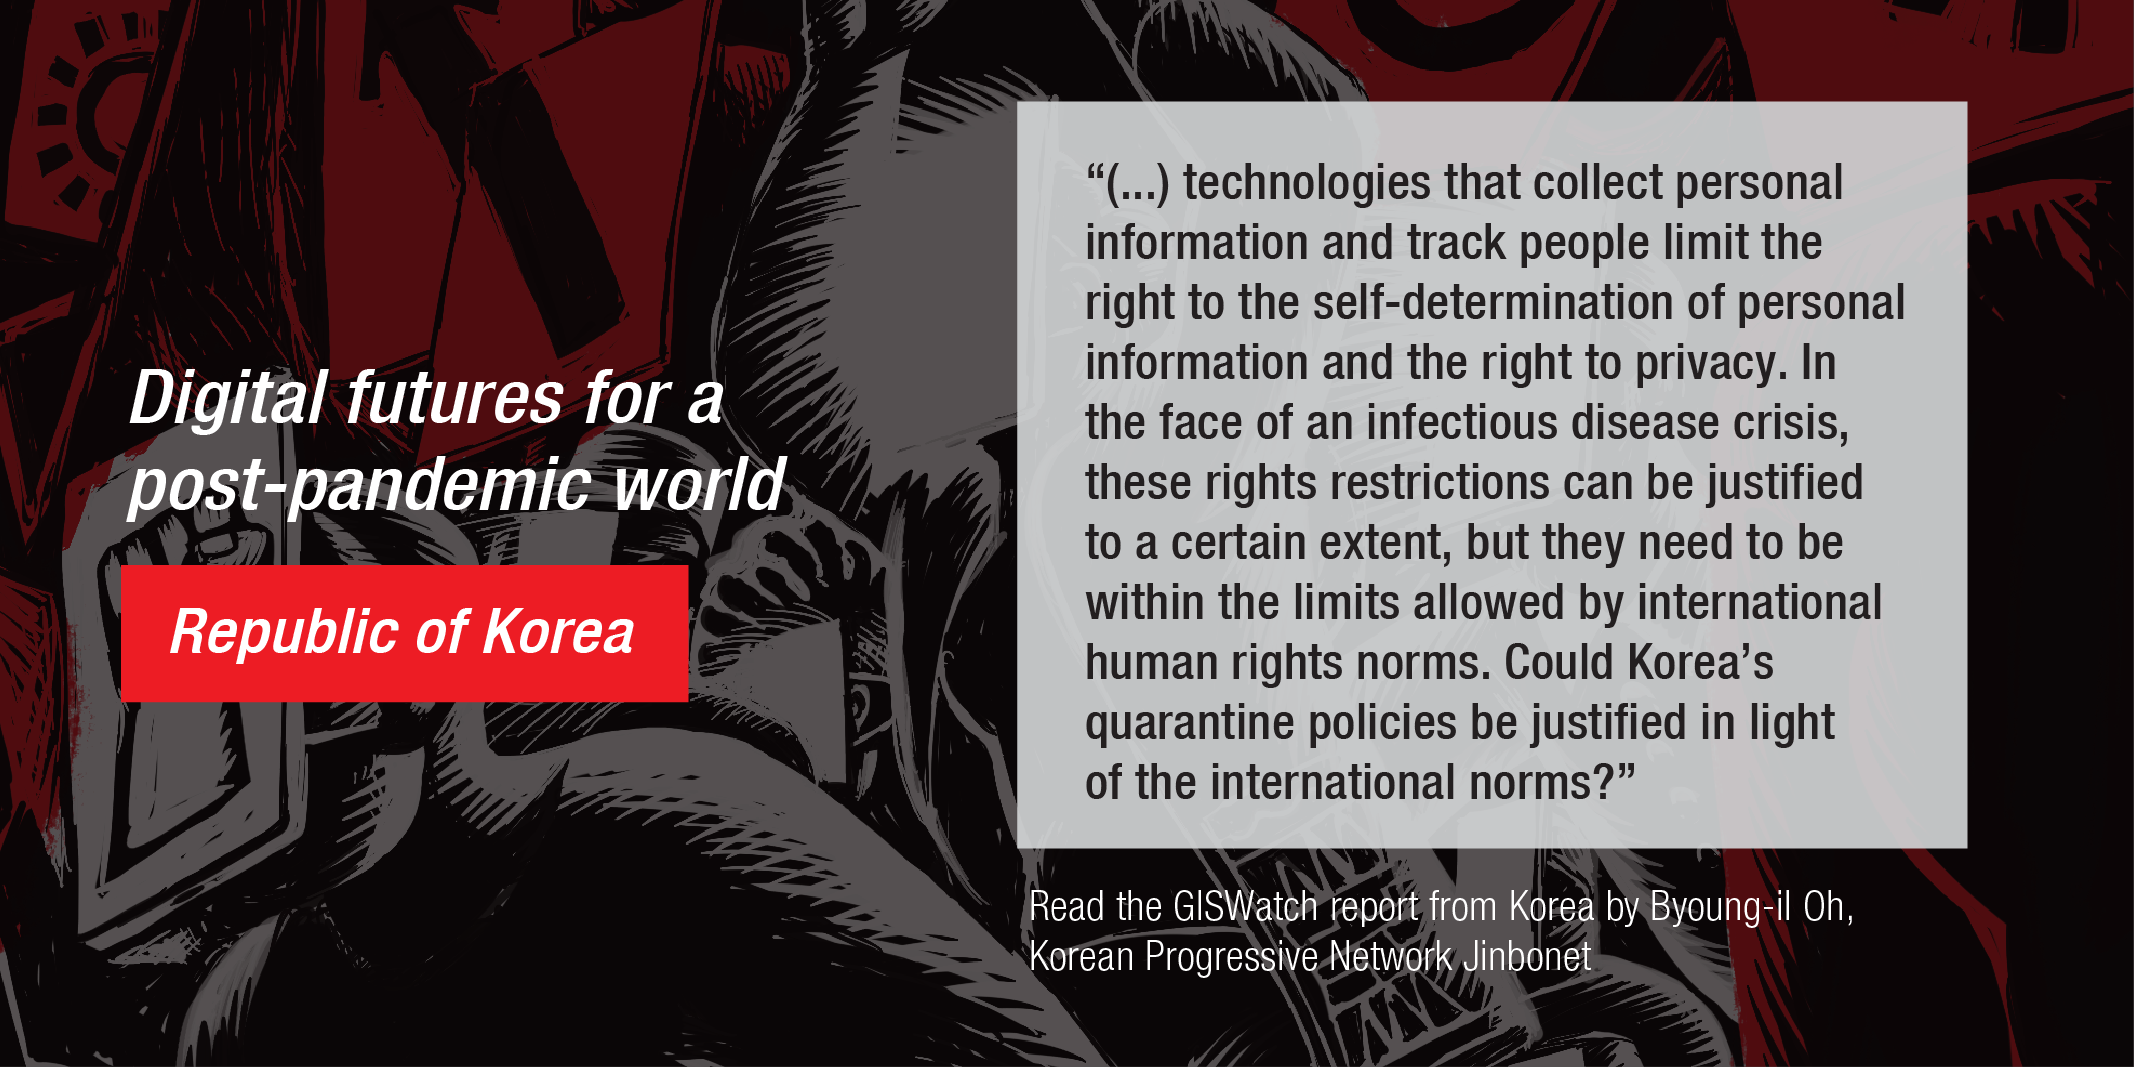 Image: Quote from Jinbonet country report on Republic of Korea in the latest edition of GISWatch